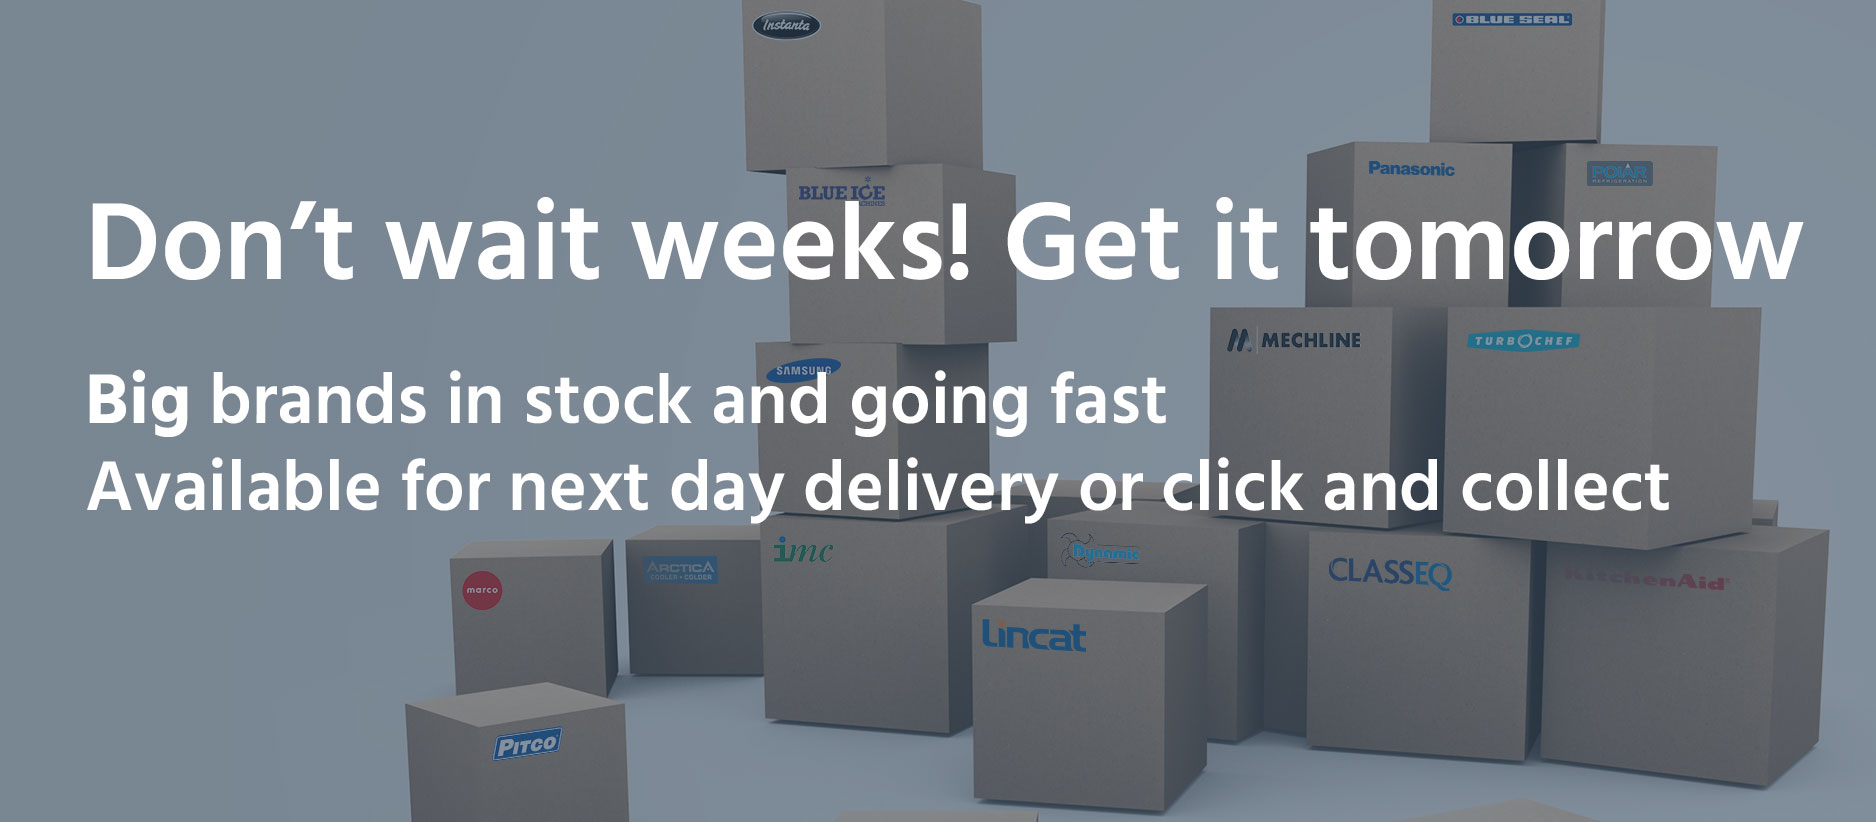 Don't wait weeks get it tomorrow, Big Brands in stock and going fast, Available for next day delivery or click and collect